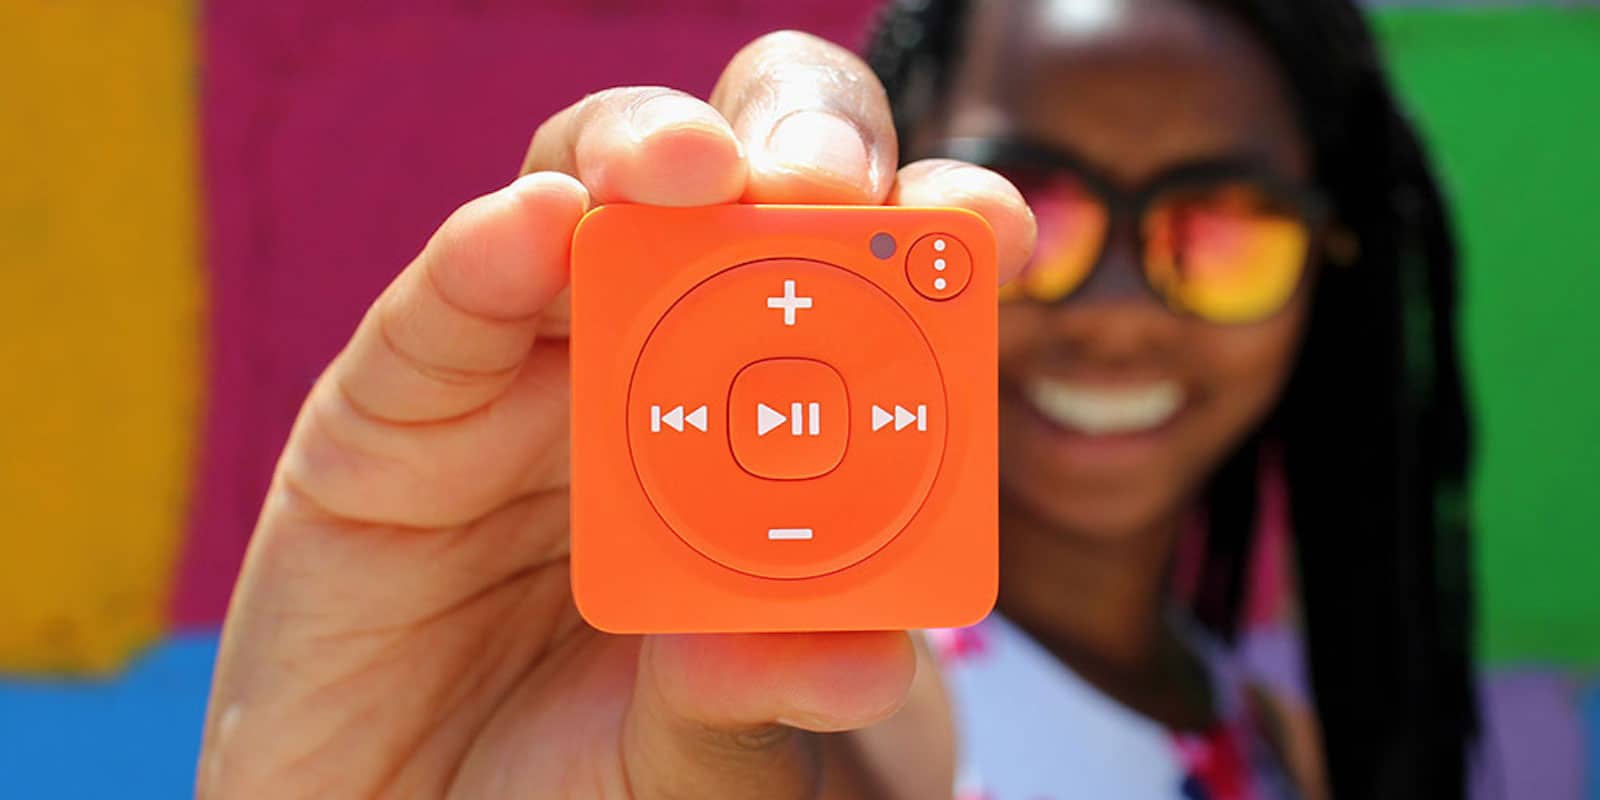 Play all your favorite Spotify playlists with this water-resistant personal music player.